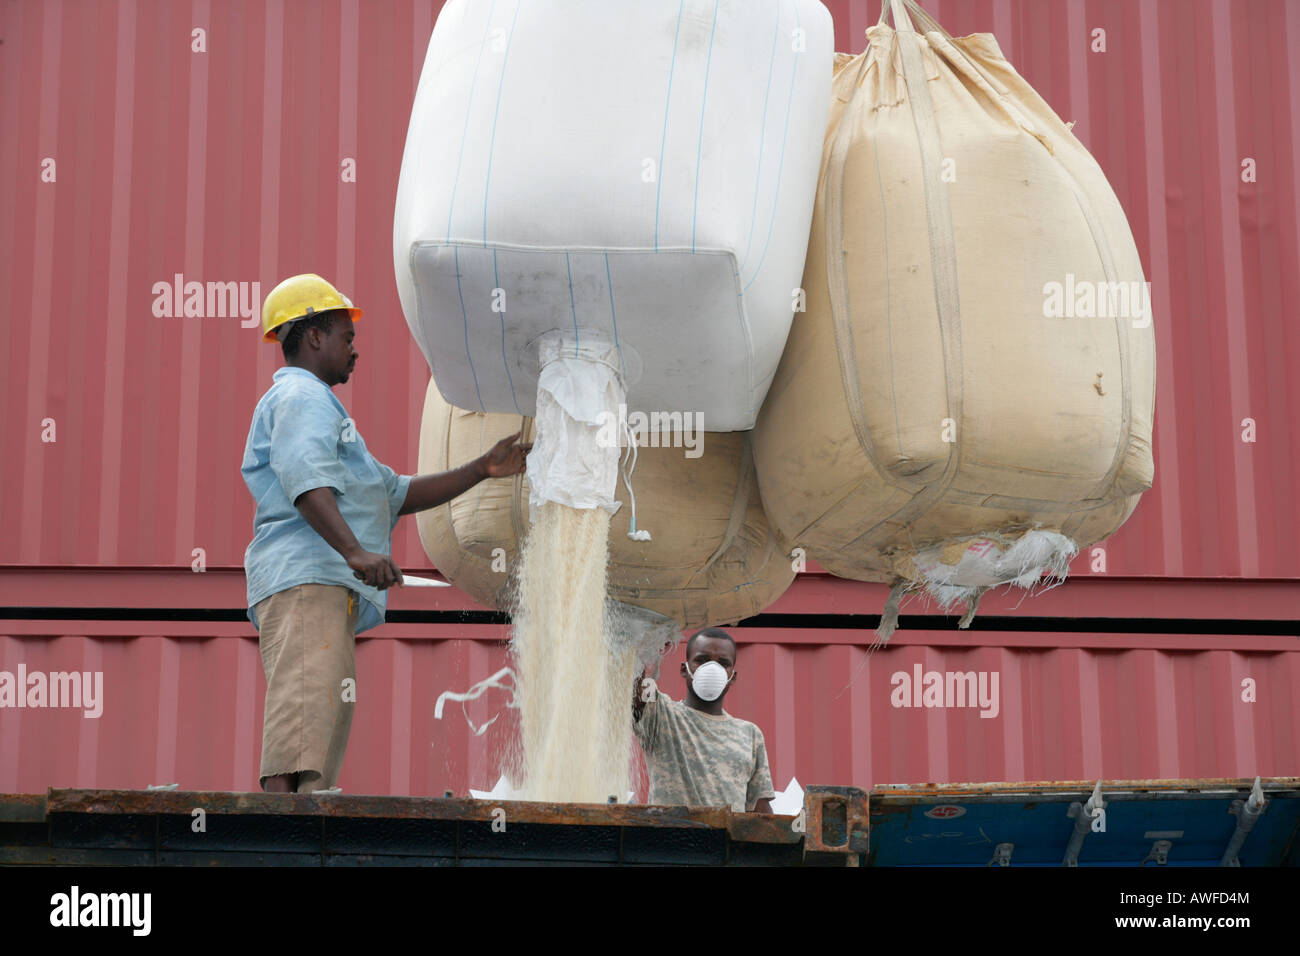 Dock workers loading rice at John Fernandes transshipment port in Georgetown, Guyana, South America Stock Photo